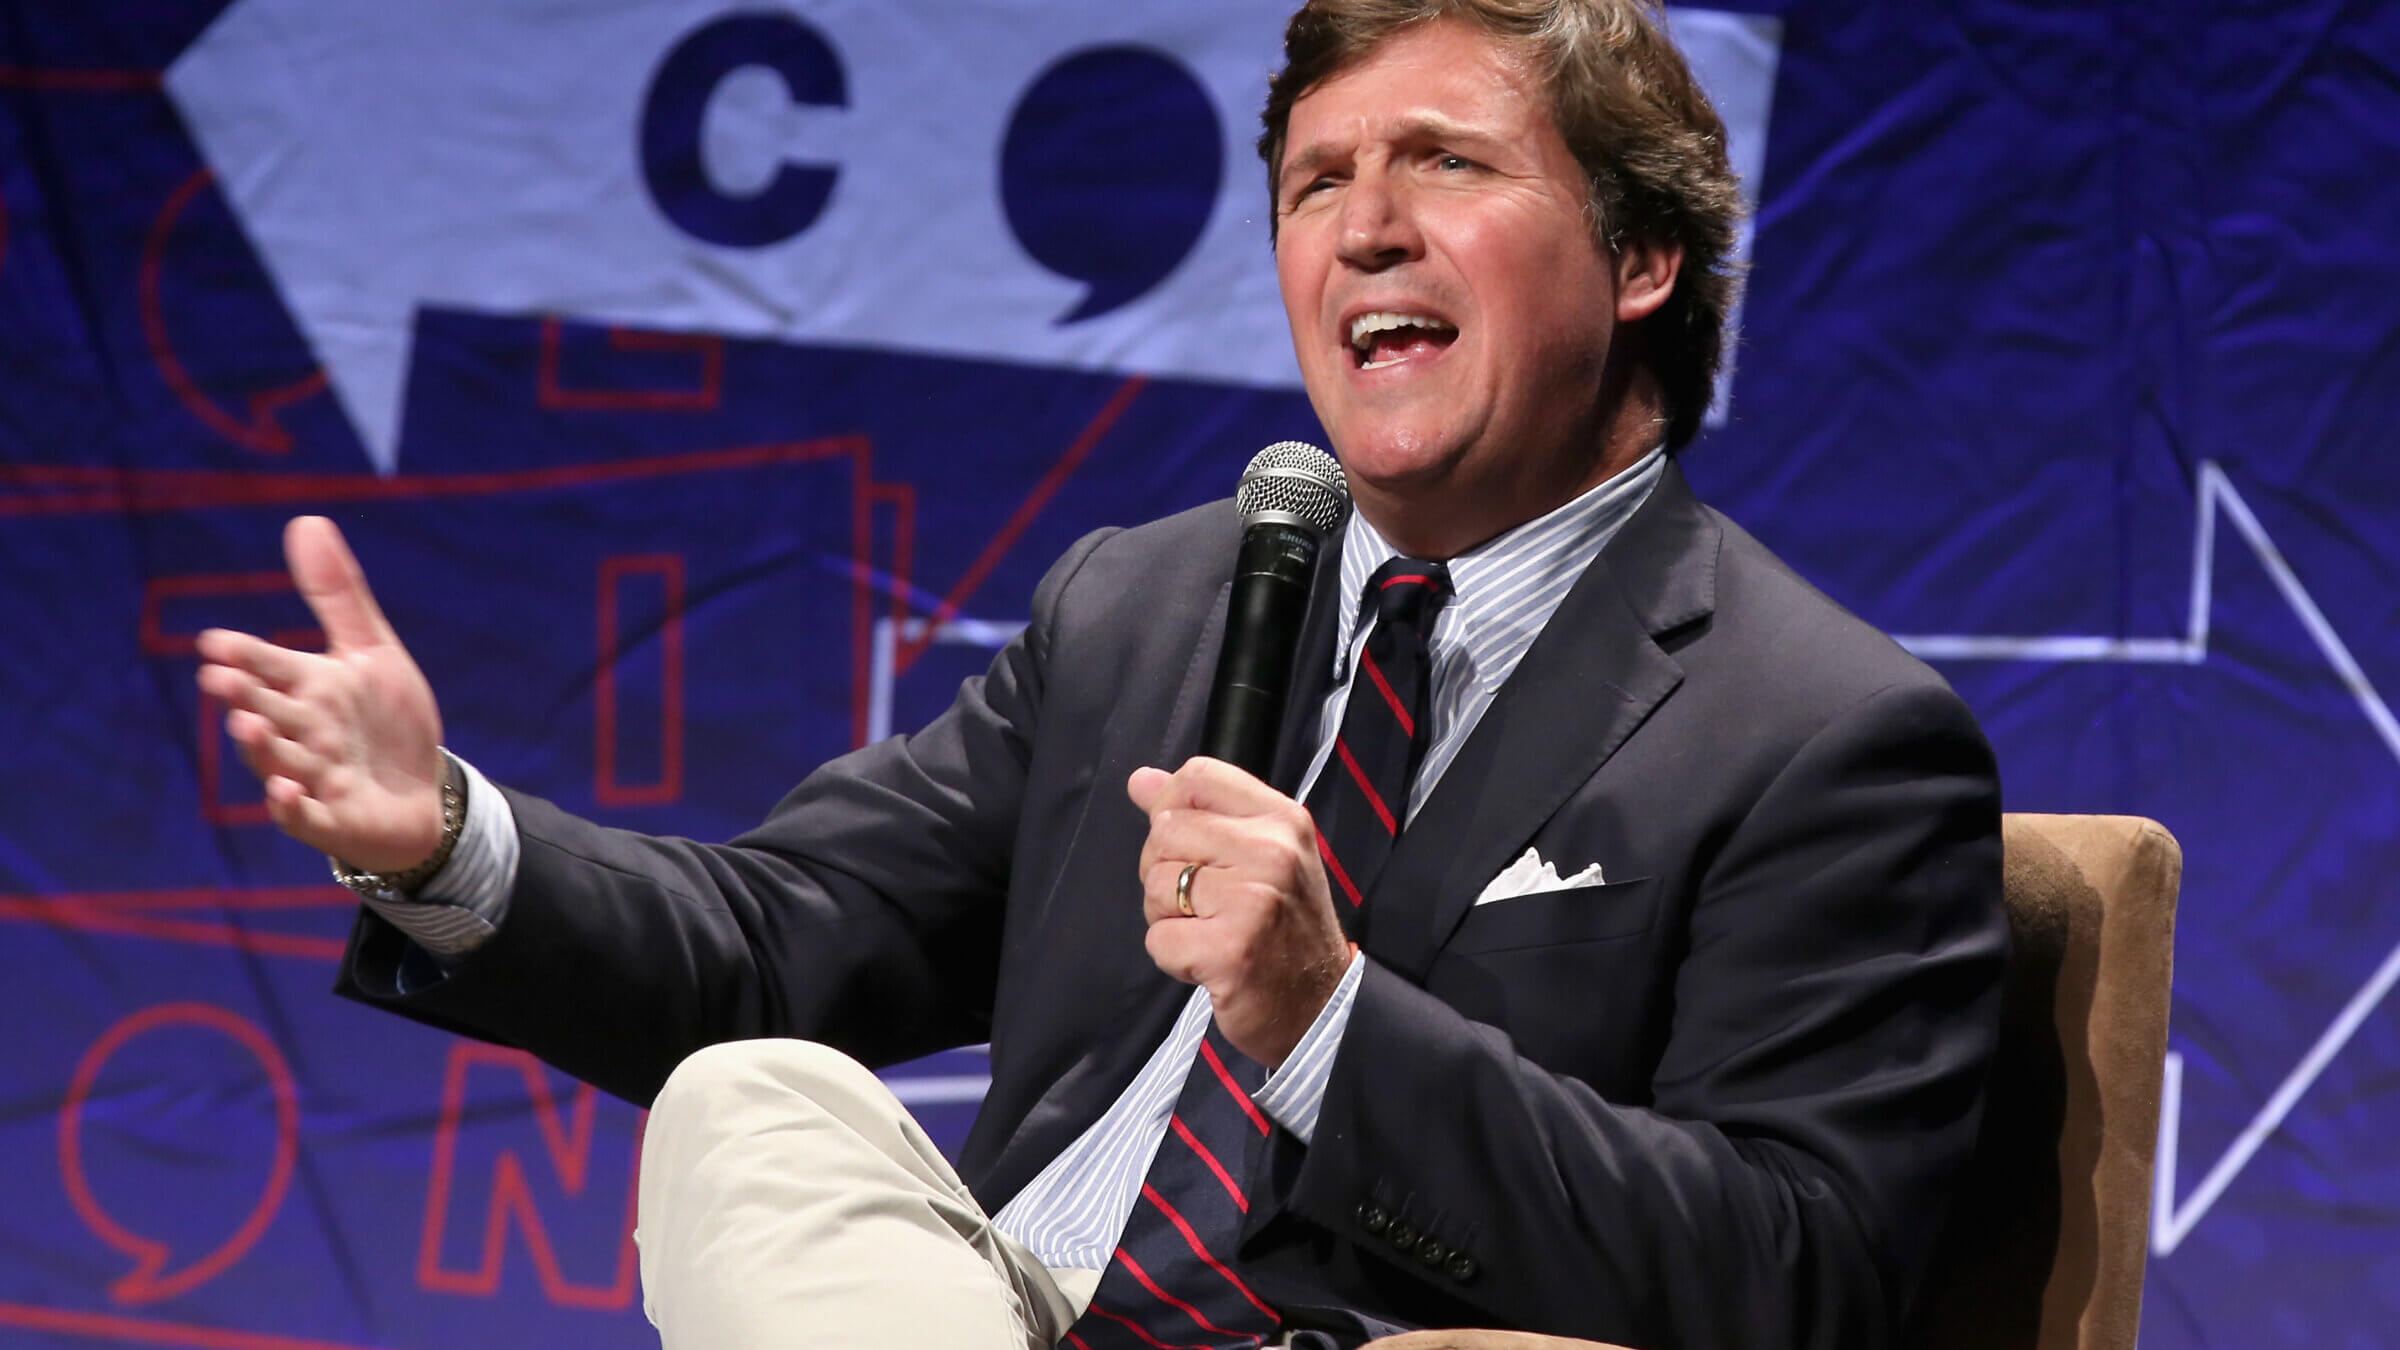 Tucker Carlson speaks onstage during Politicon 2018 at Los Angeles Convention Center on October 21, 2018 in Los Angeles